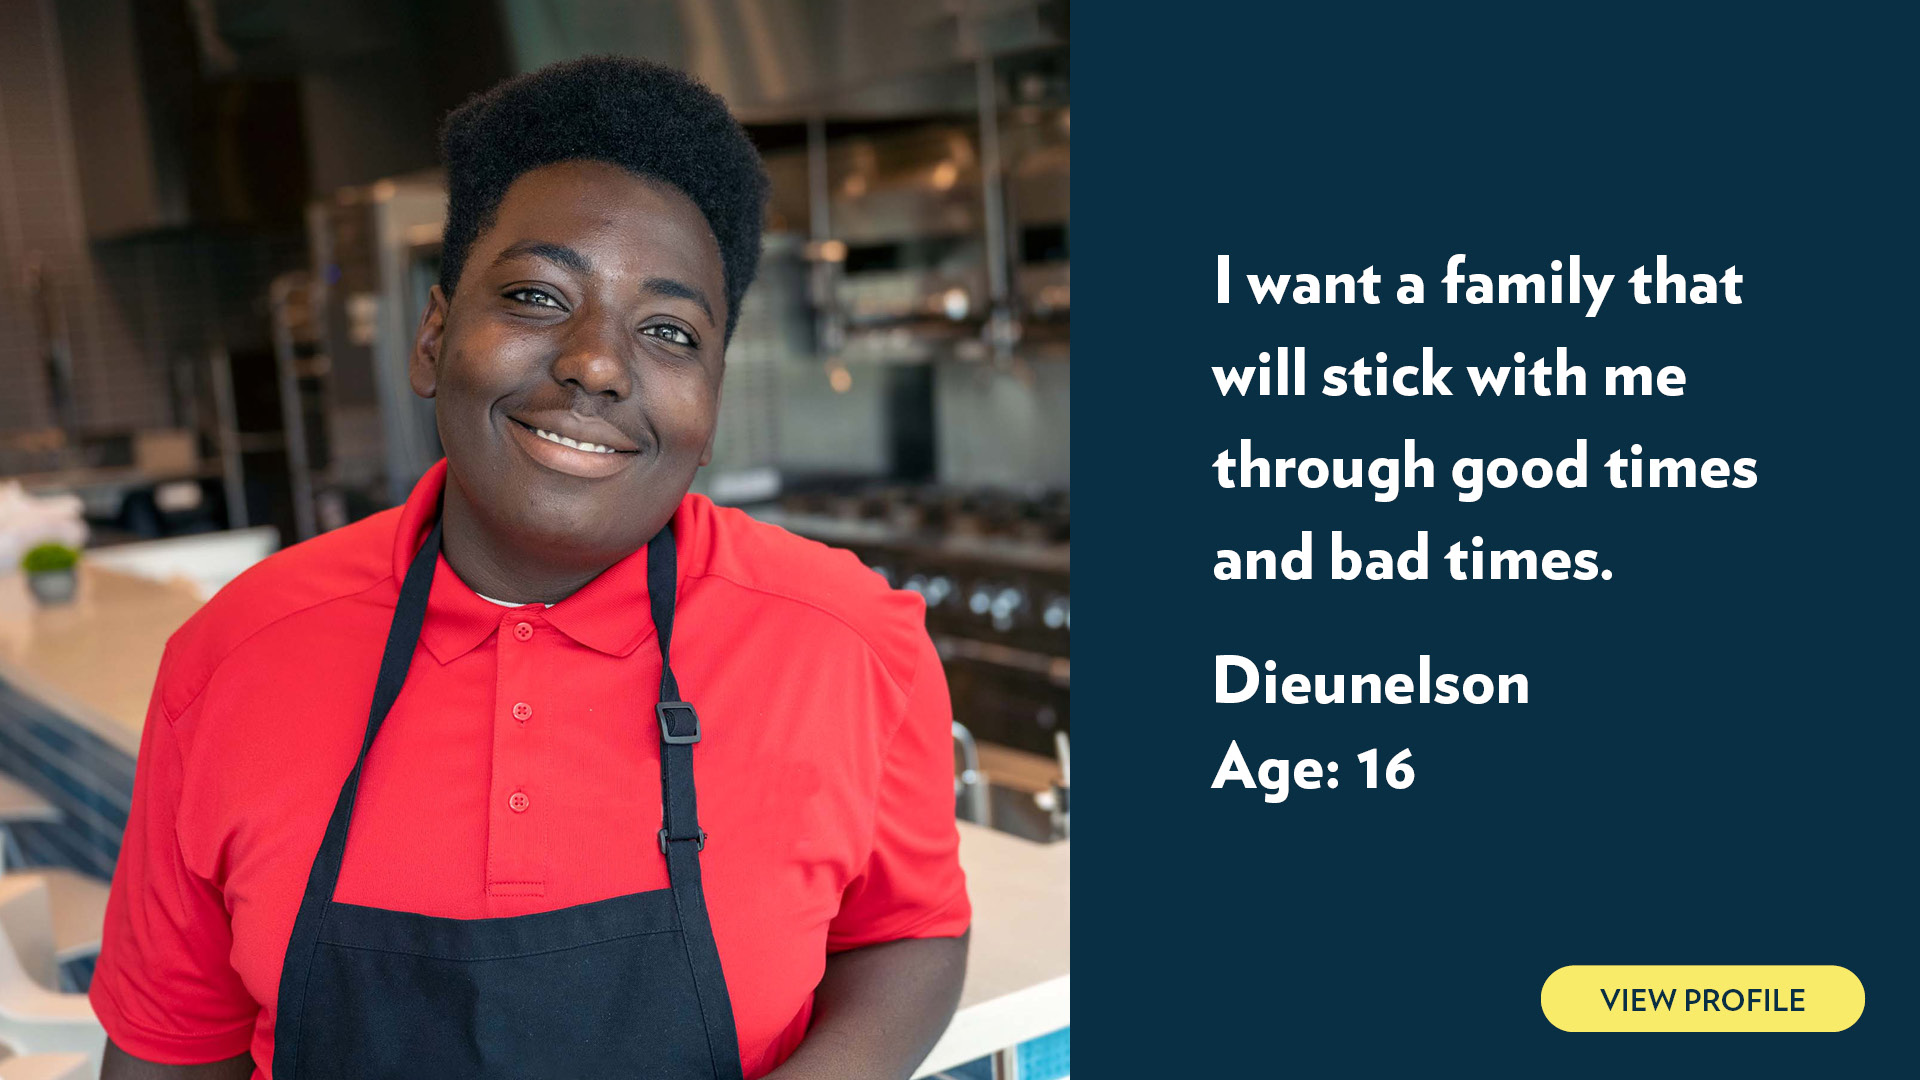 Dieunelson, age 16. I want a family that will stick with me through good times and bad times. View profile.